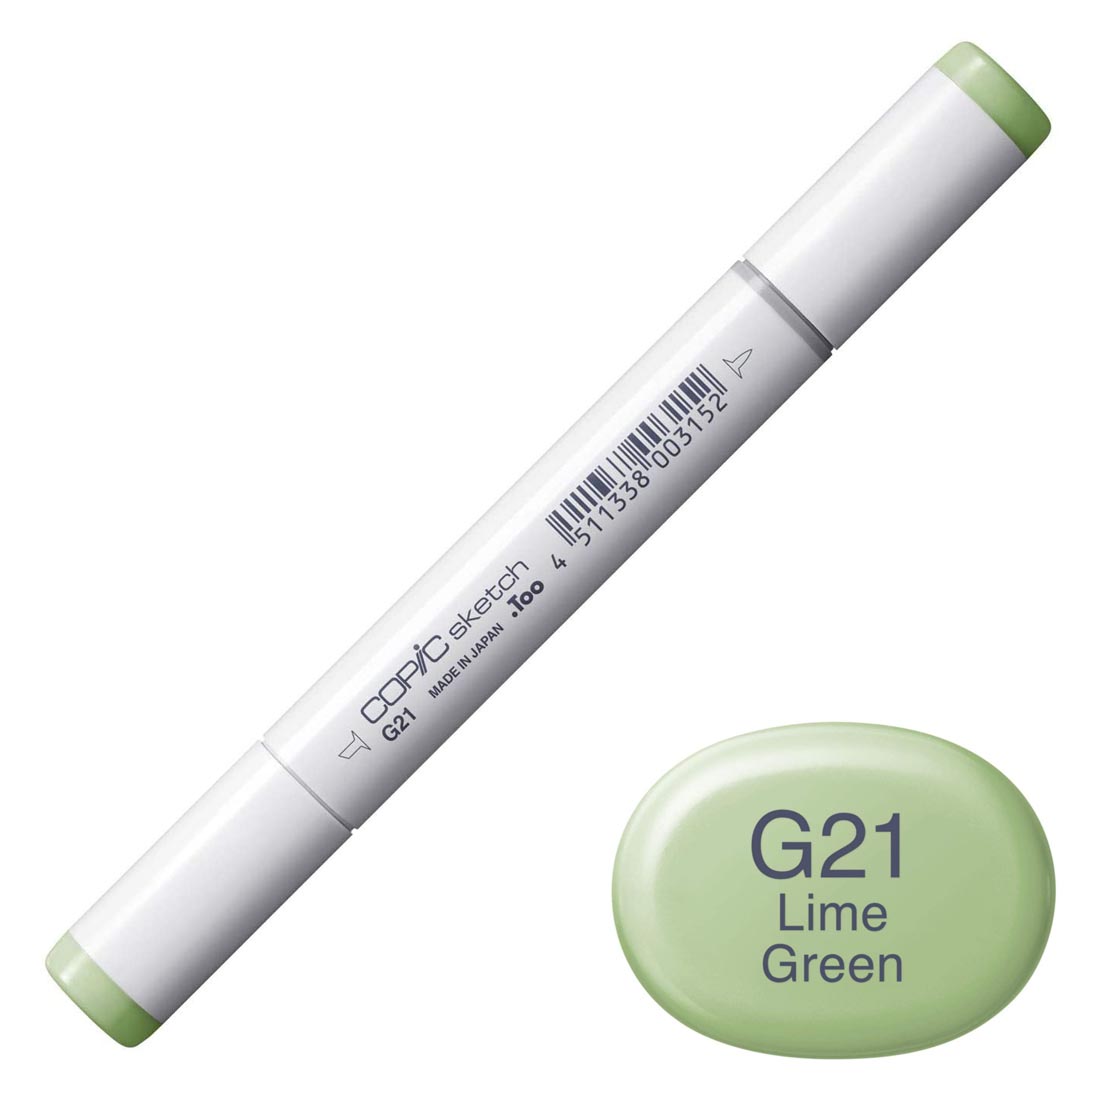 COPIC Sketch Marker with a color swatch and text of G21 Lime Green